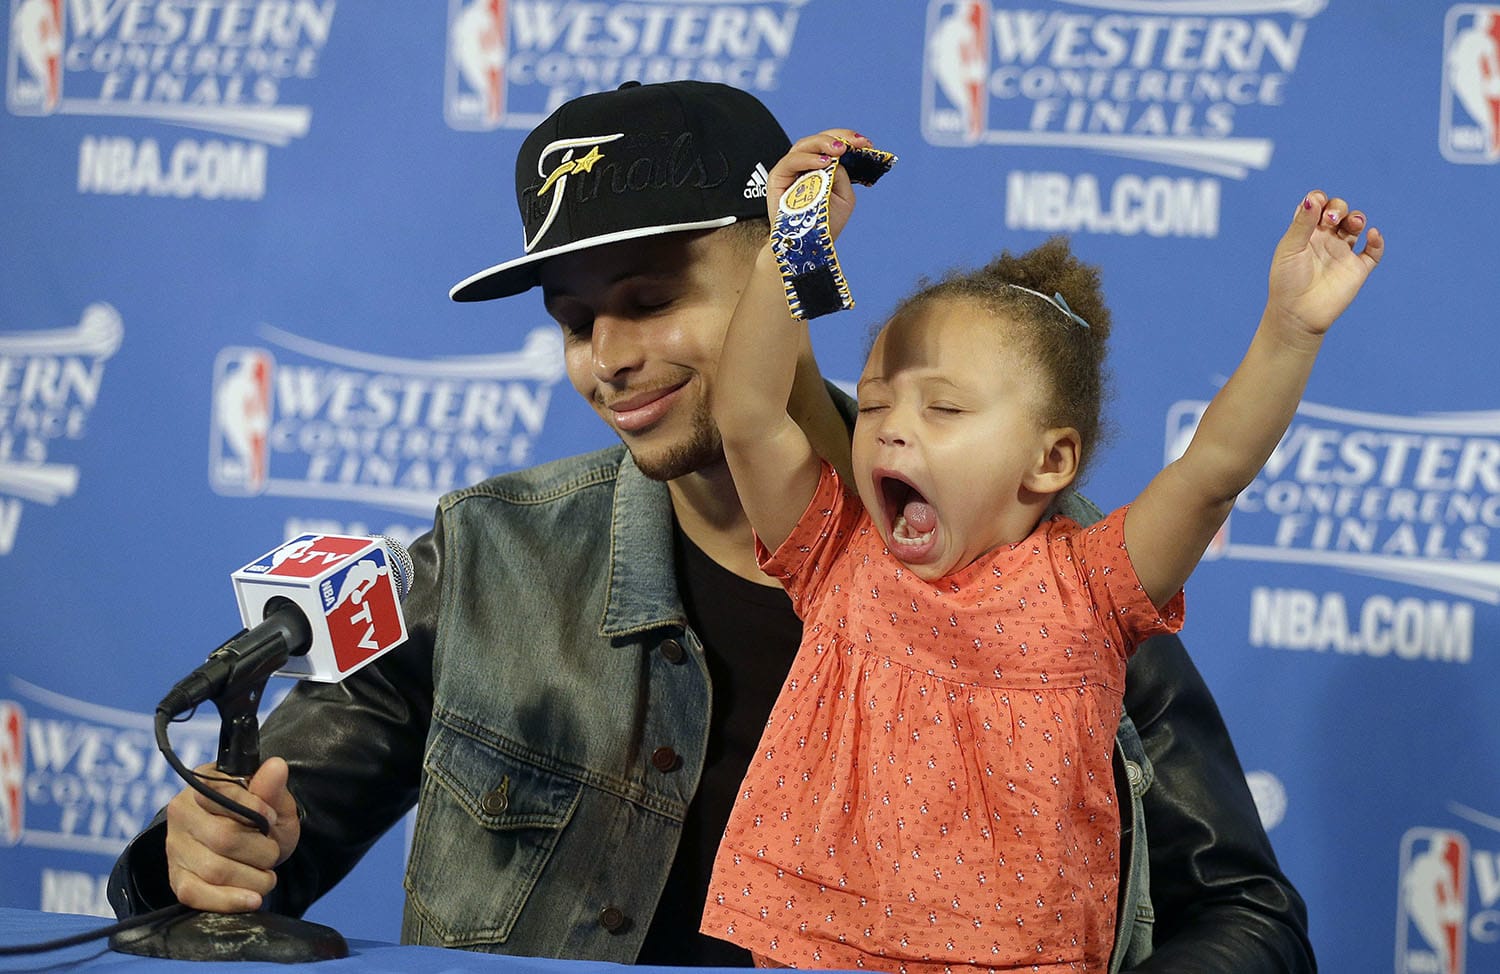 NBA star Stephen Curry's wife defends daughter's behavior - TODAY.com